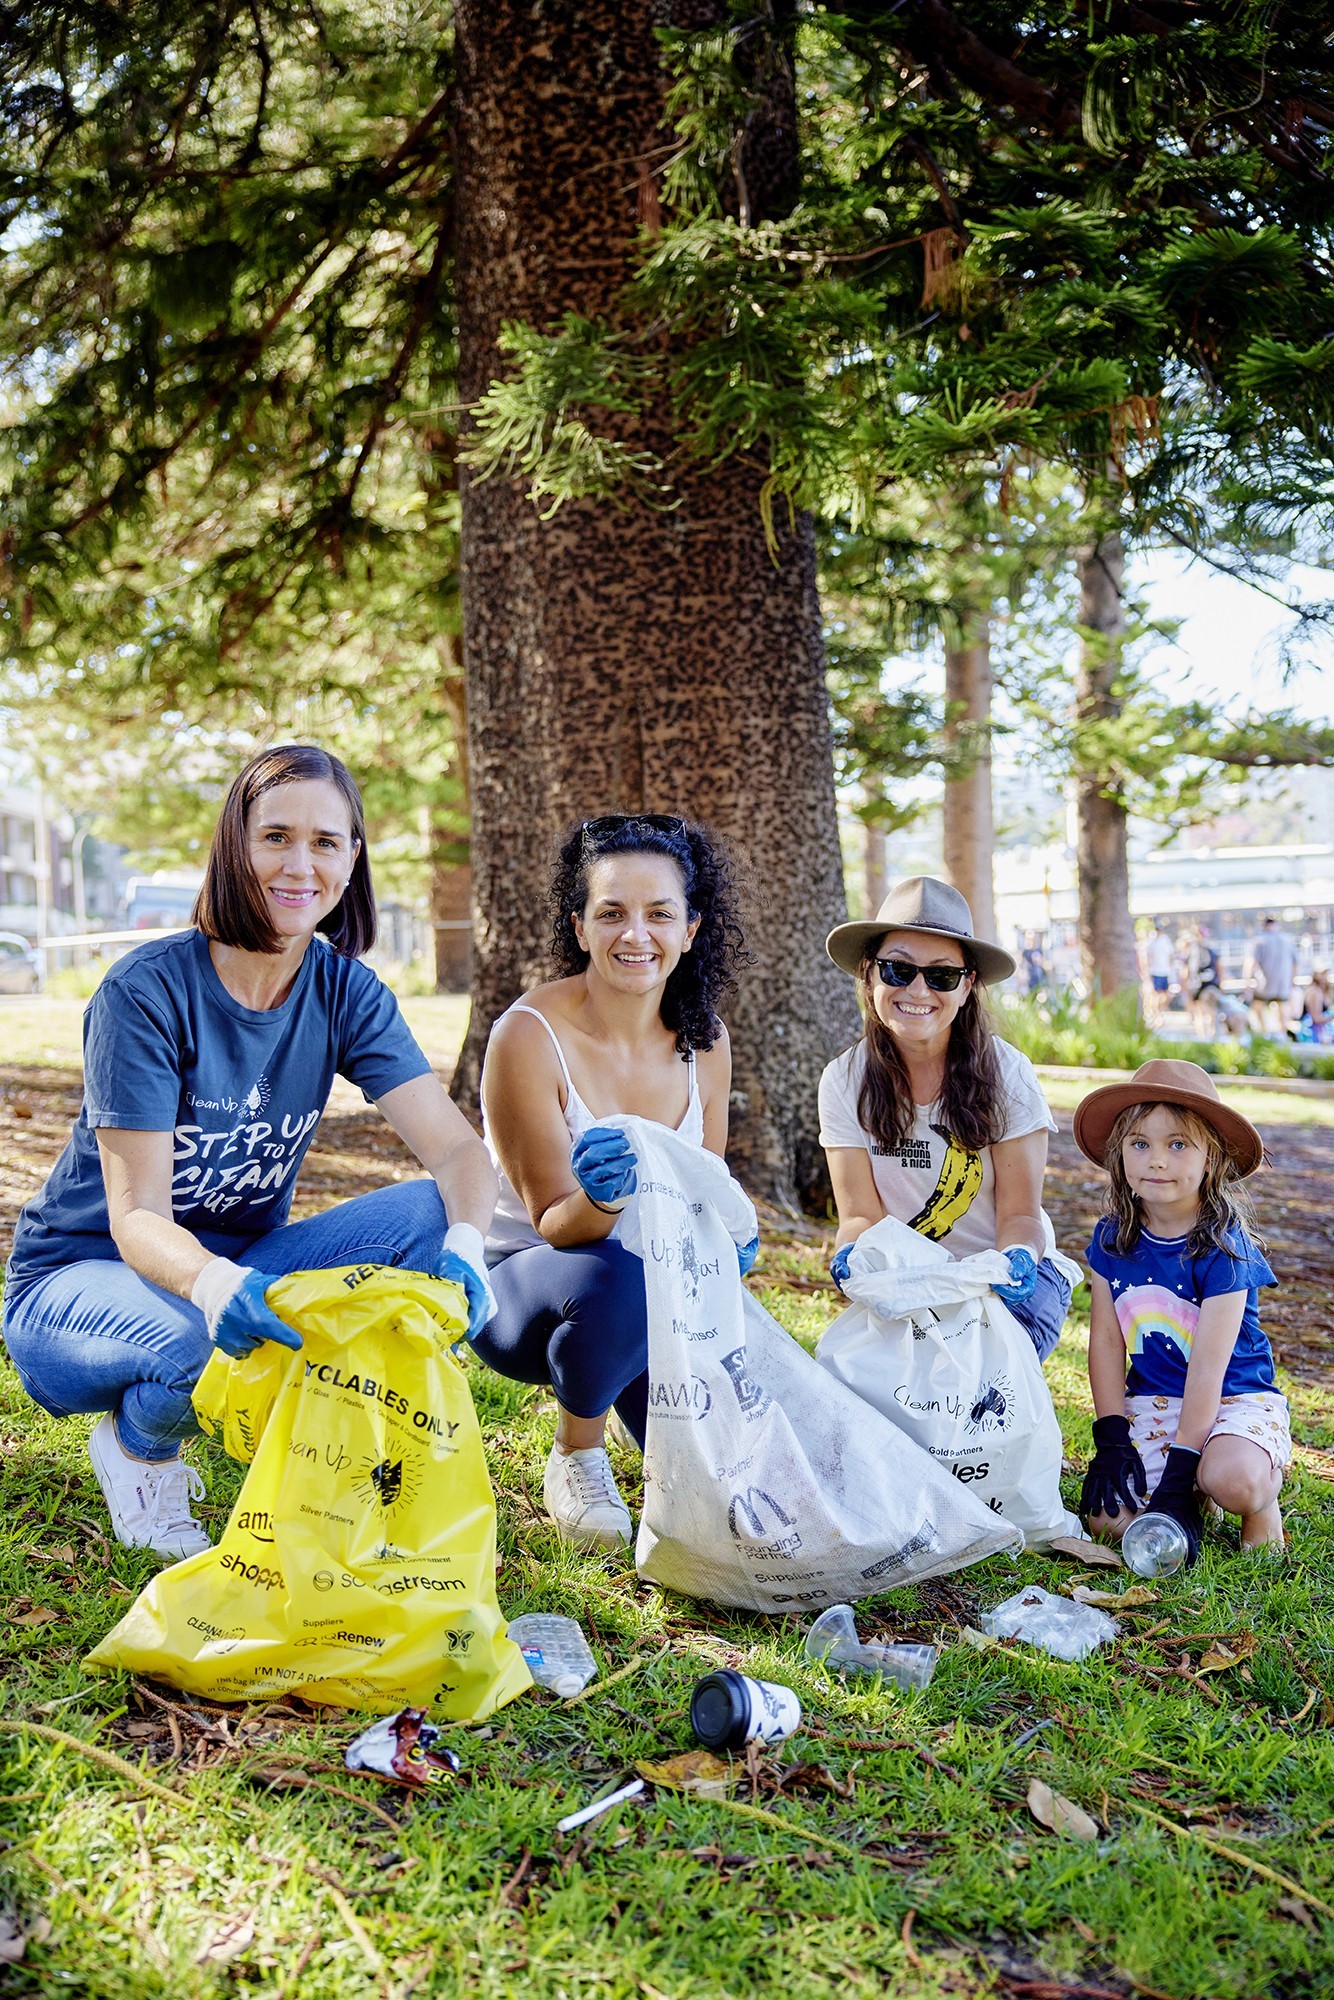 Clean up with 10-cent refunds from littered containers this Clean Up Australia Day